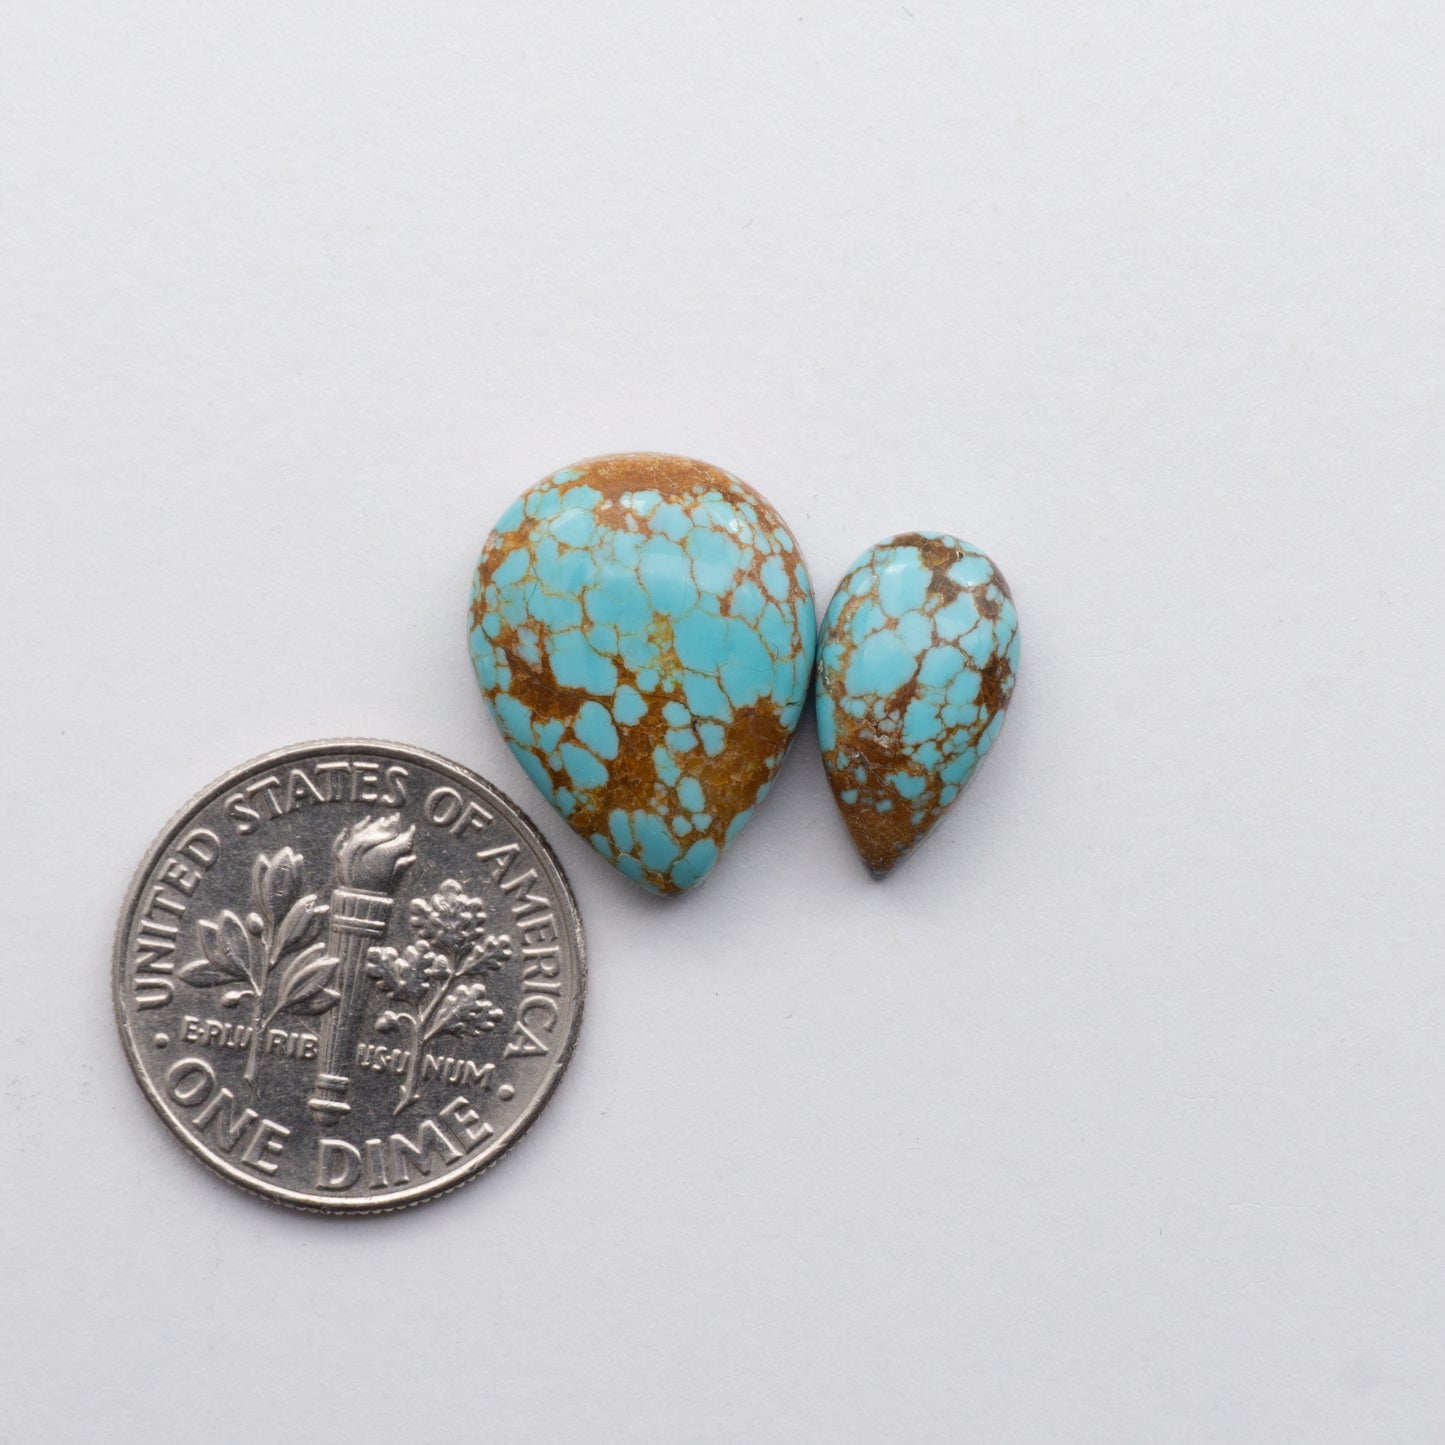 This Number 8 Turquoise Cabochon lot is an excellent addition to any jewelry-making collection. This set includes cabochons of the highest quality, with great attention to detail to ensure each stone is stunningly unique. Thanks to the intricate patterning.